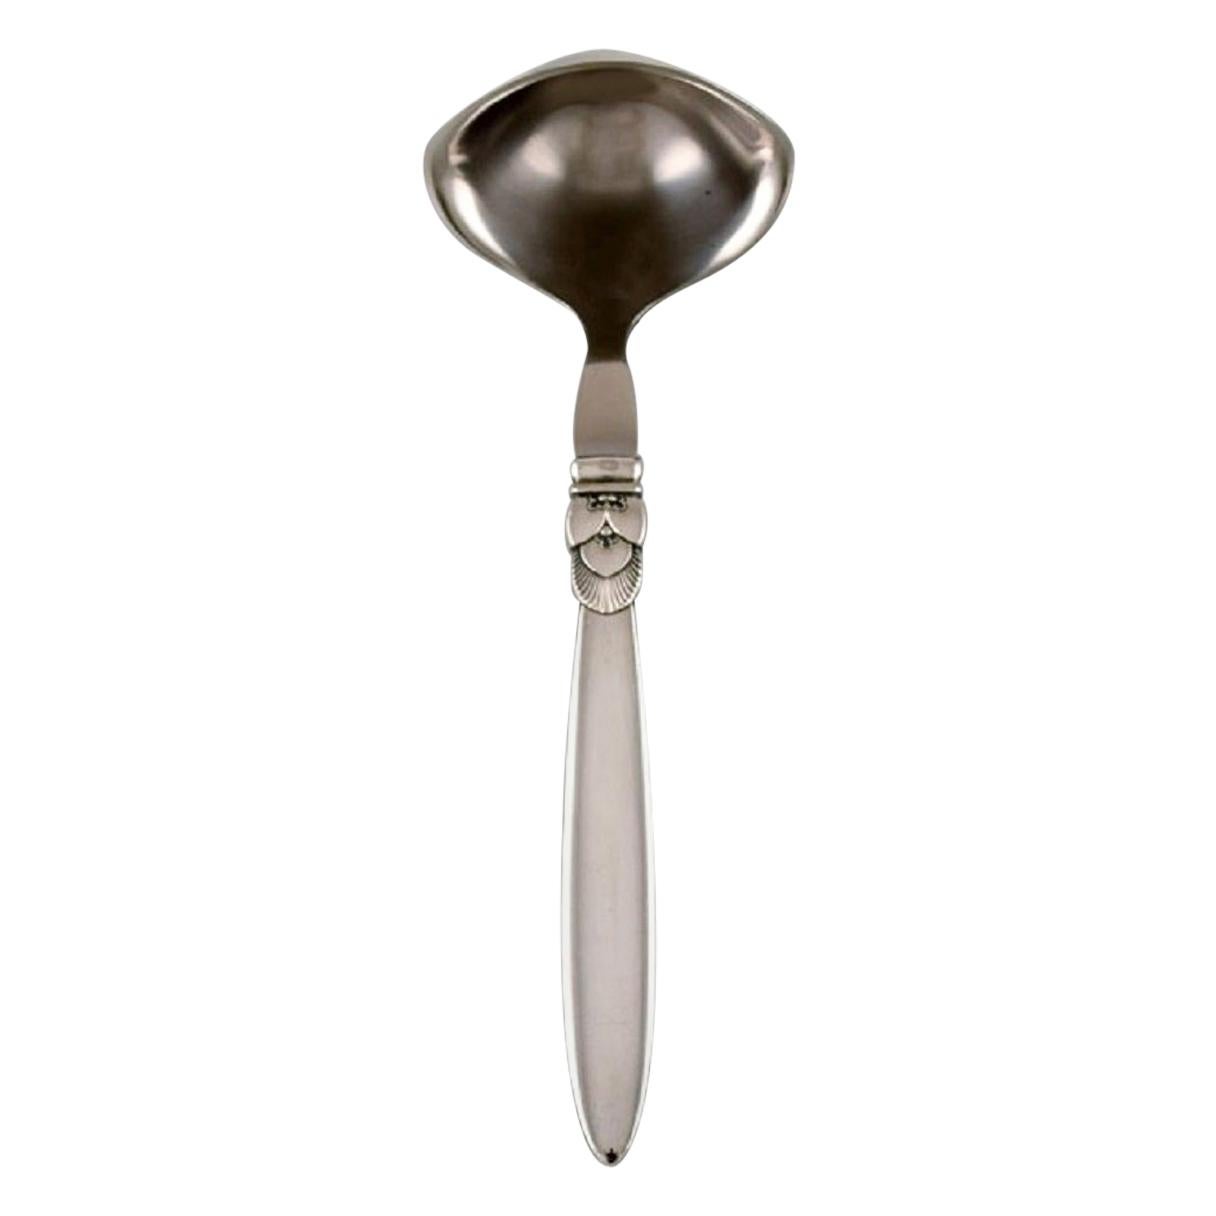 Georg Jensen "Cactus" Sauce Spoon in Sterling Silver and Stainless Steel